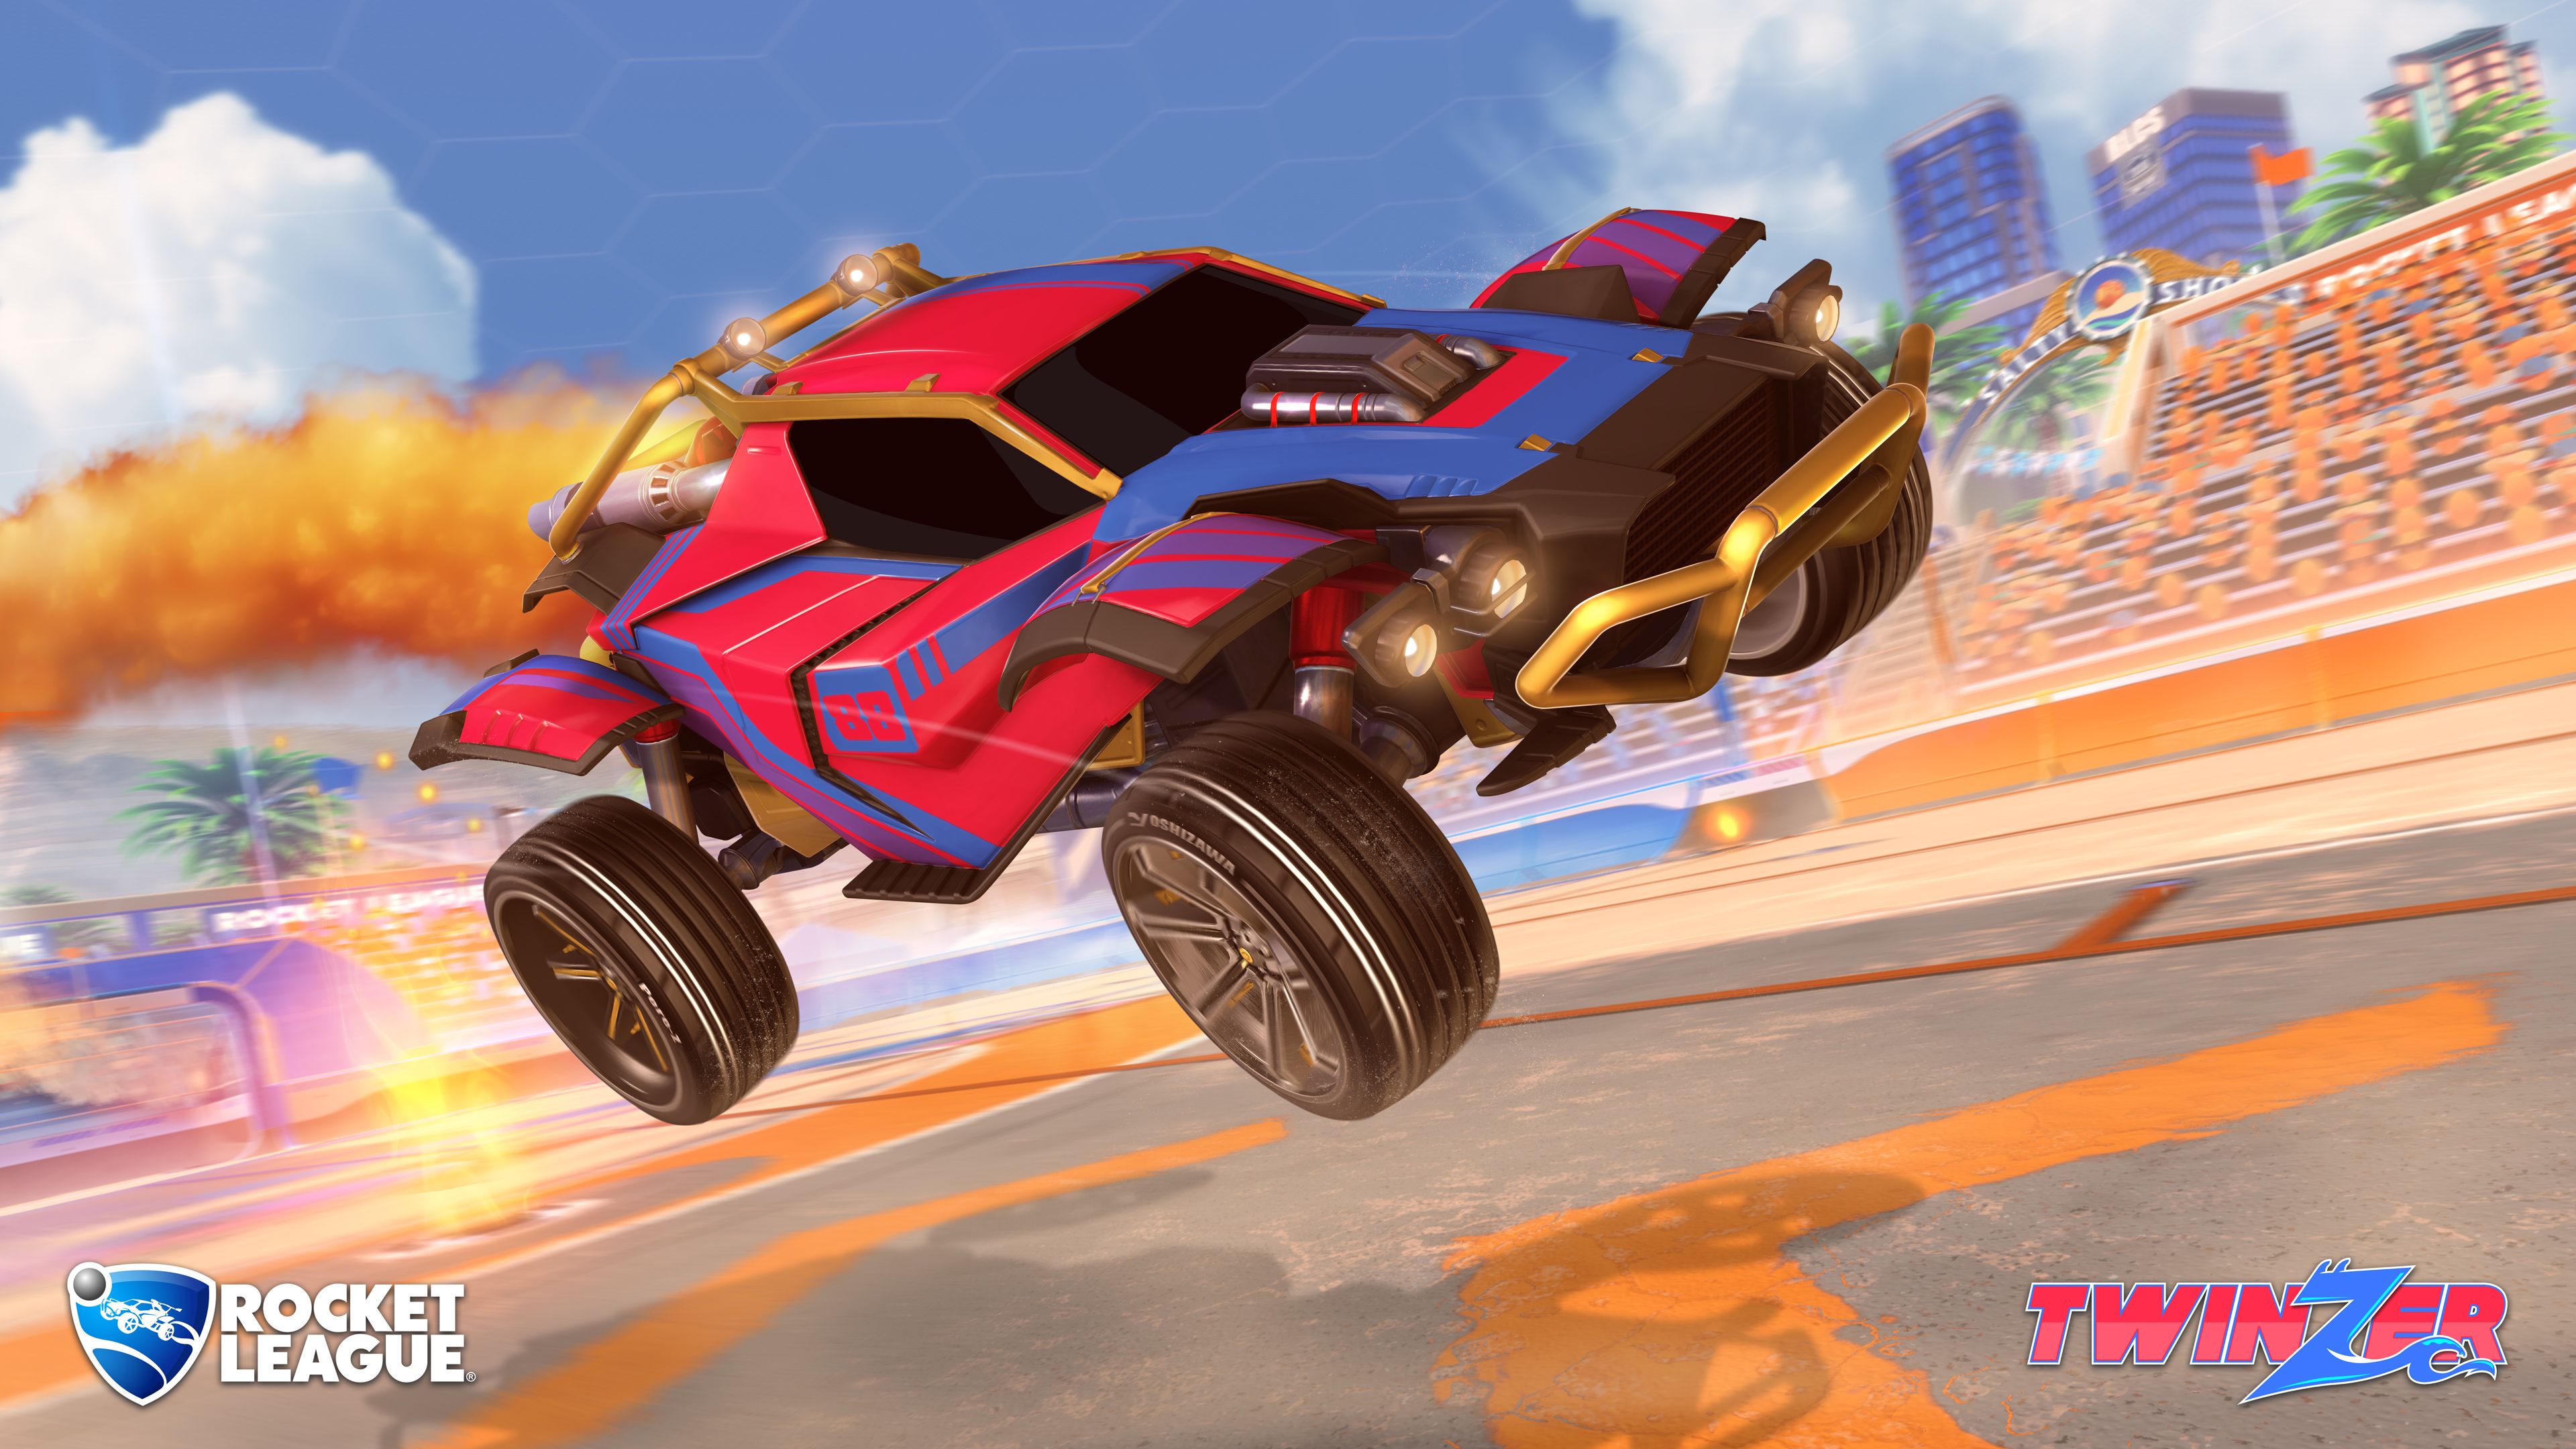 Rocket League What EVERY Car Looks Like (Including Crossover DLC)